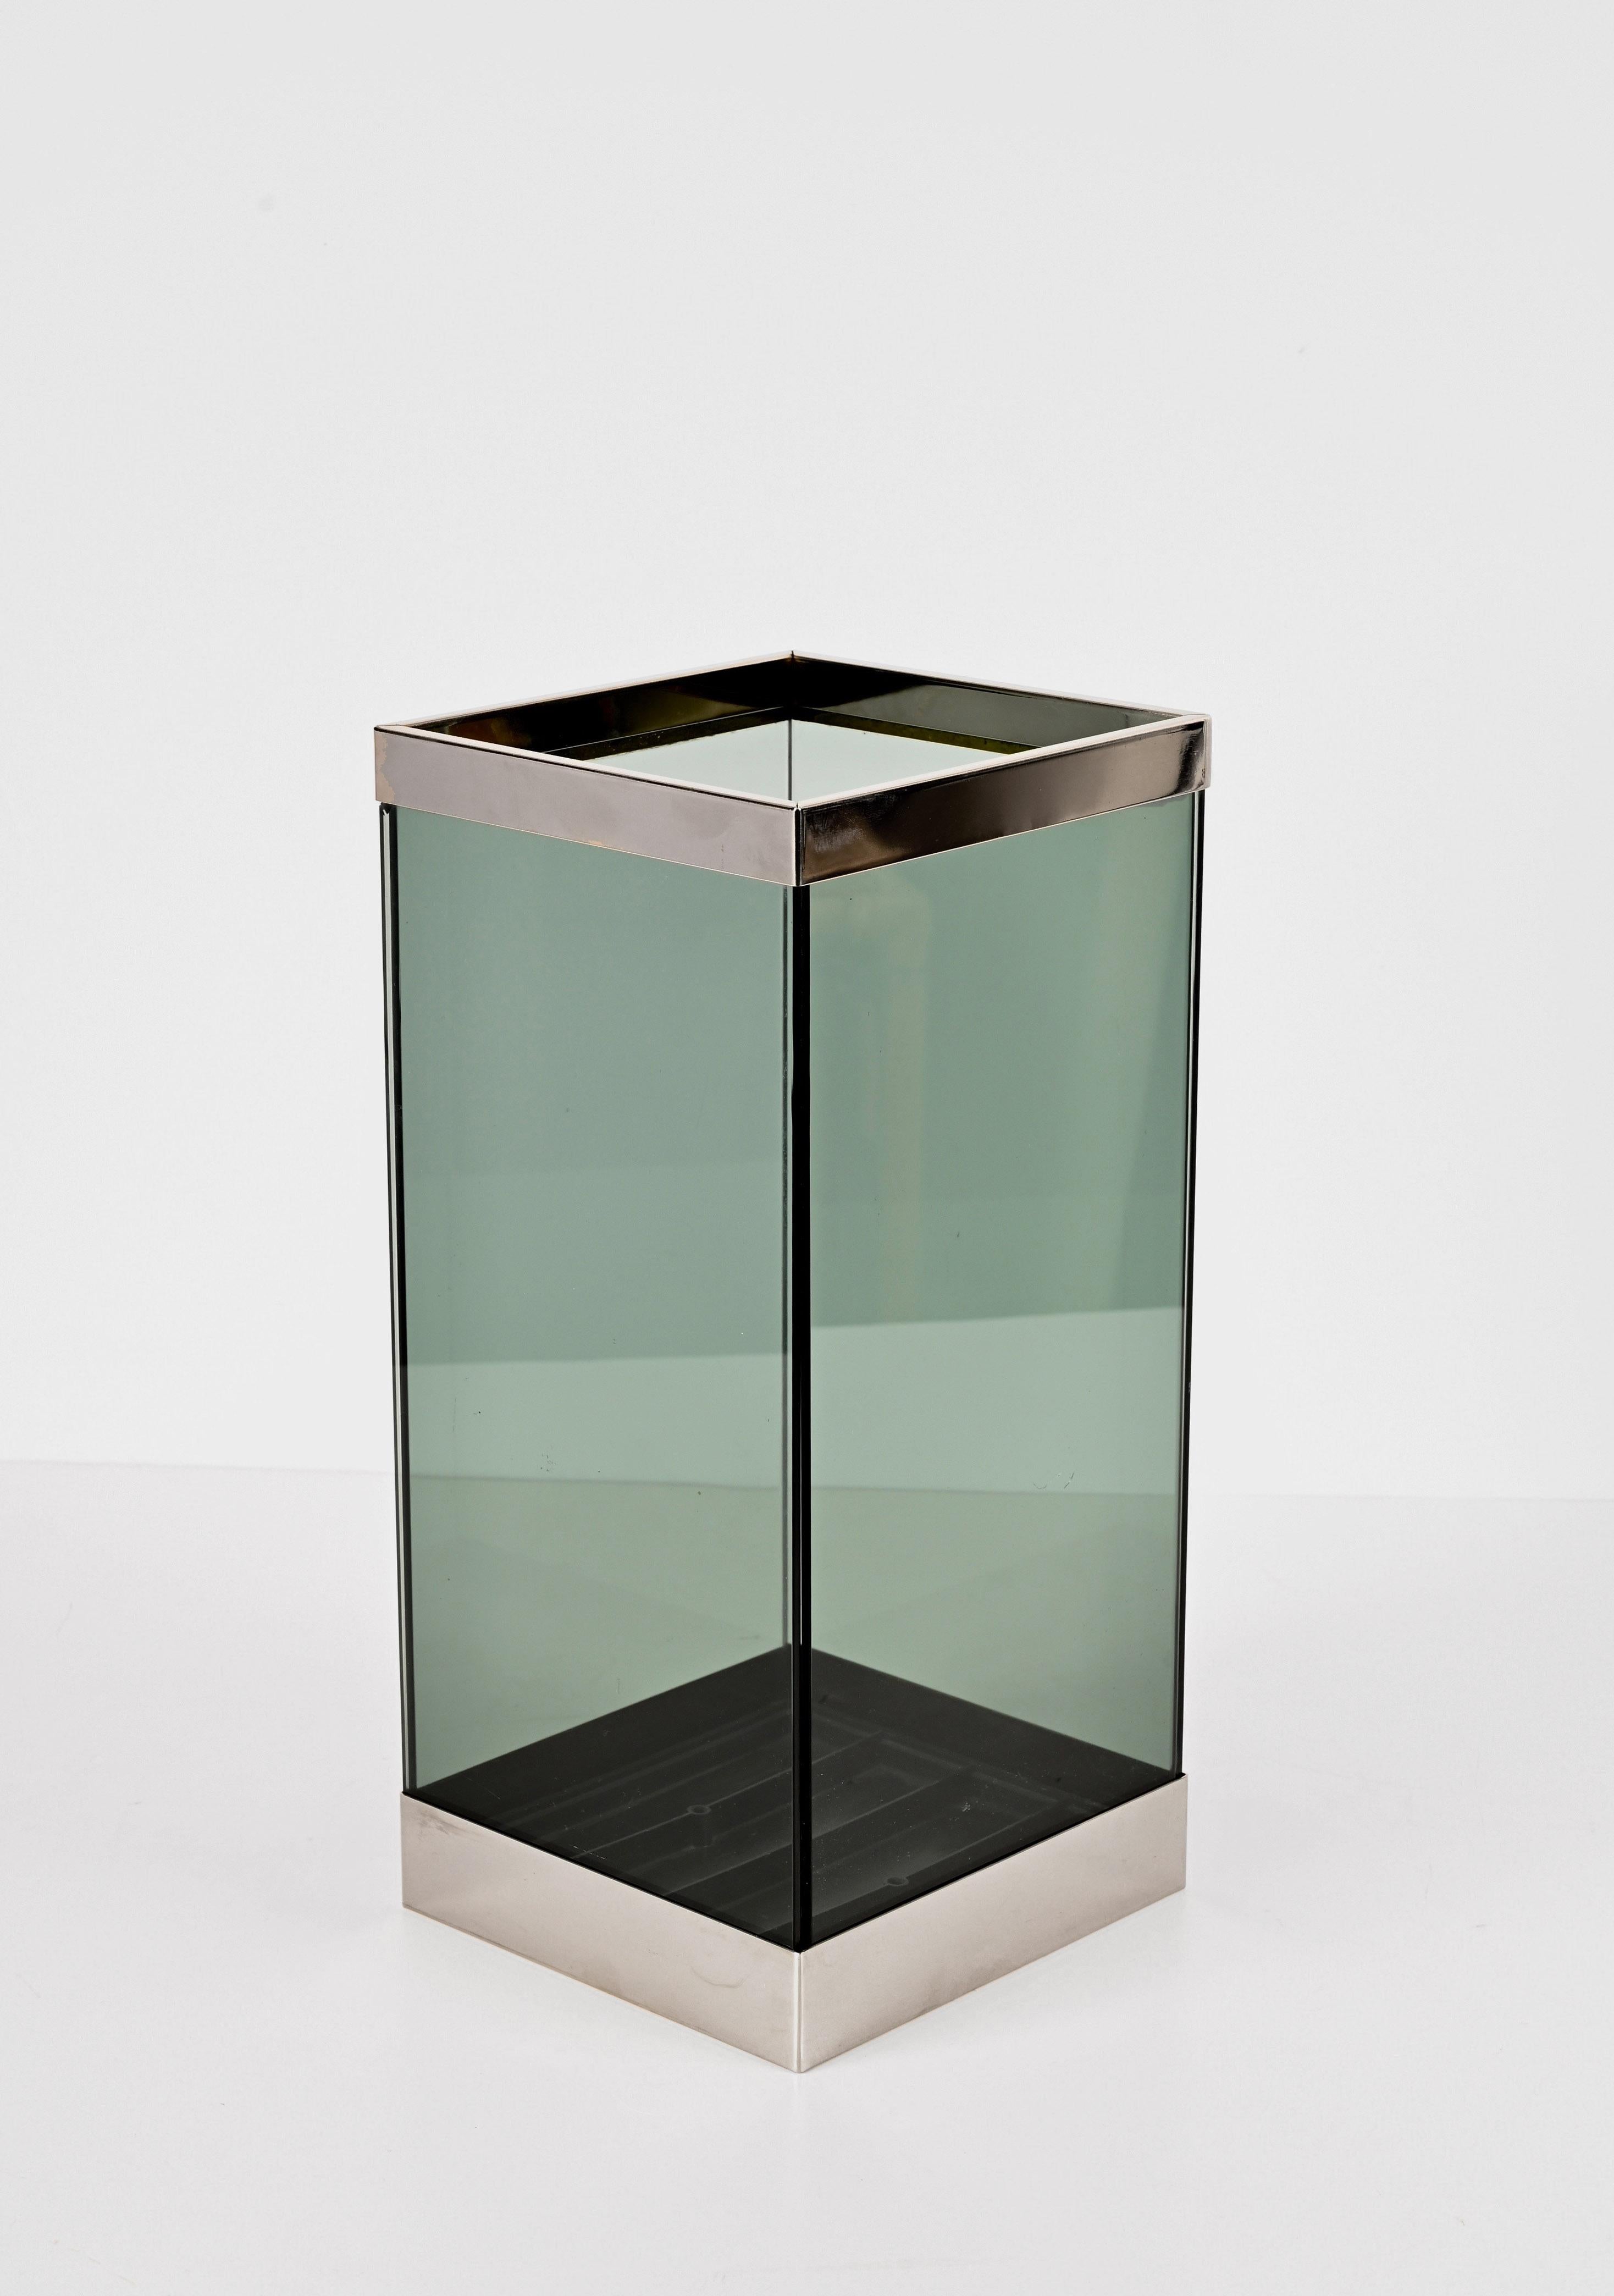 Fantastic midcentury umbrella stand in smoked green glass and chrome. This piece was designed in Italy during the 1970s after Willy Rizzo.

This item has gorgeous yet simple straight lines, with a clear inspiration from rationalist Willy Rizzo's